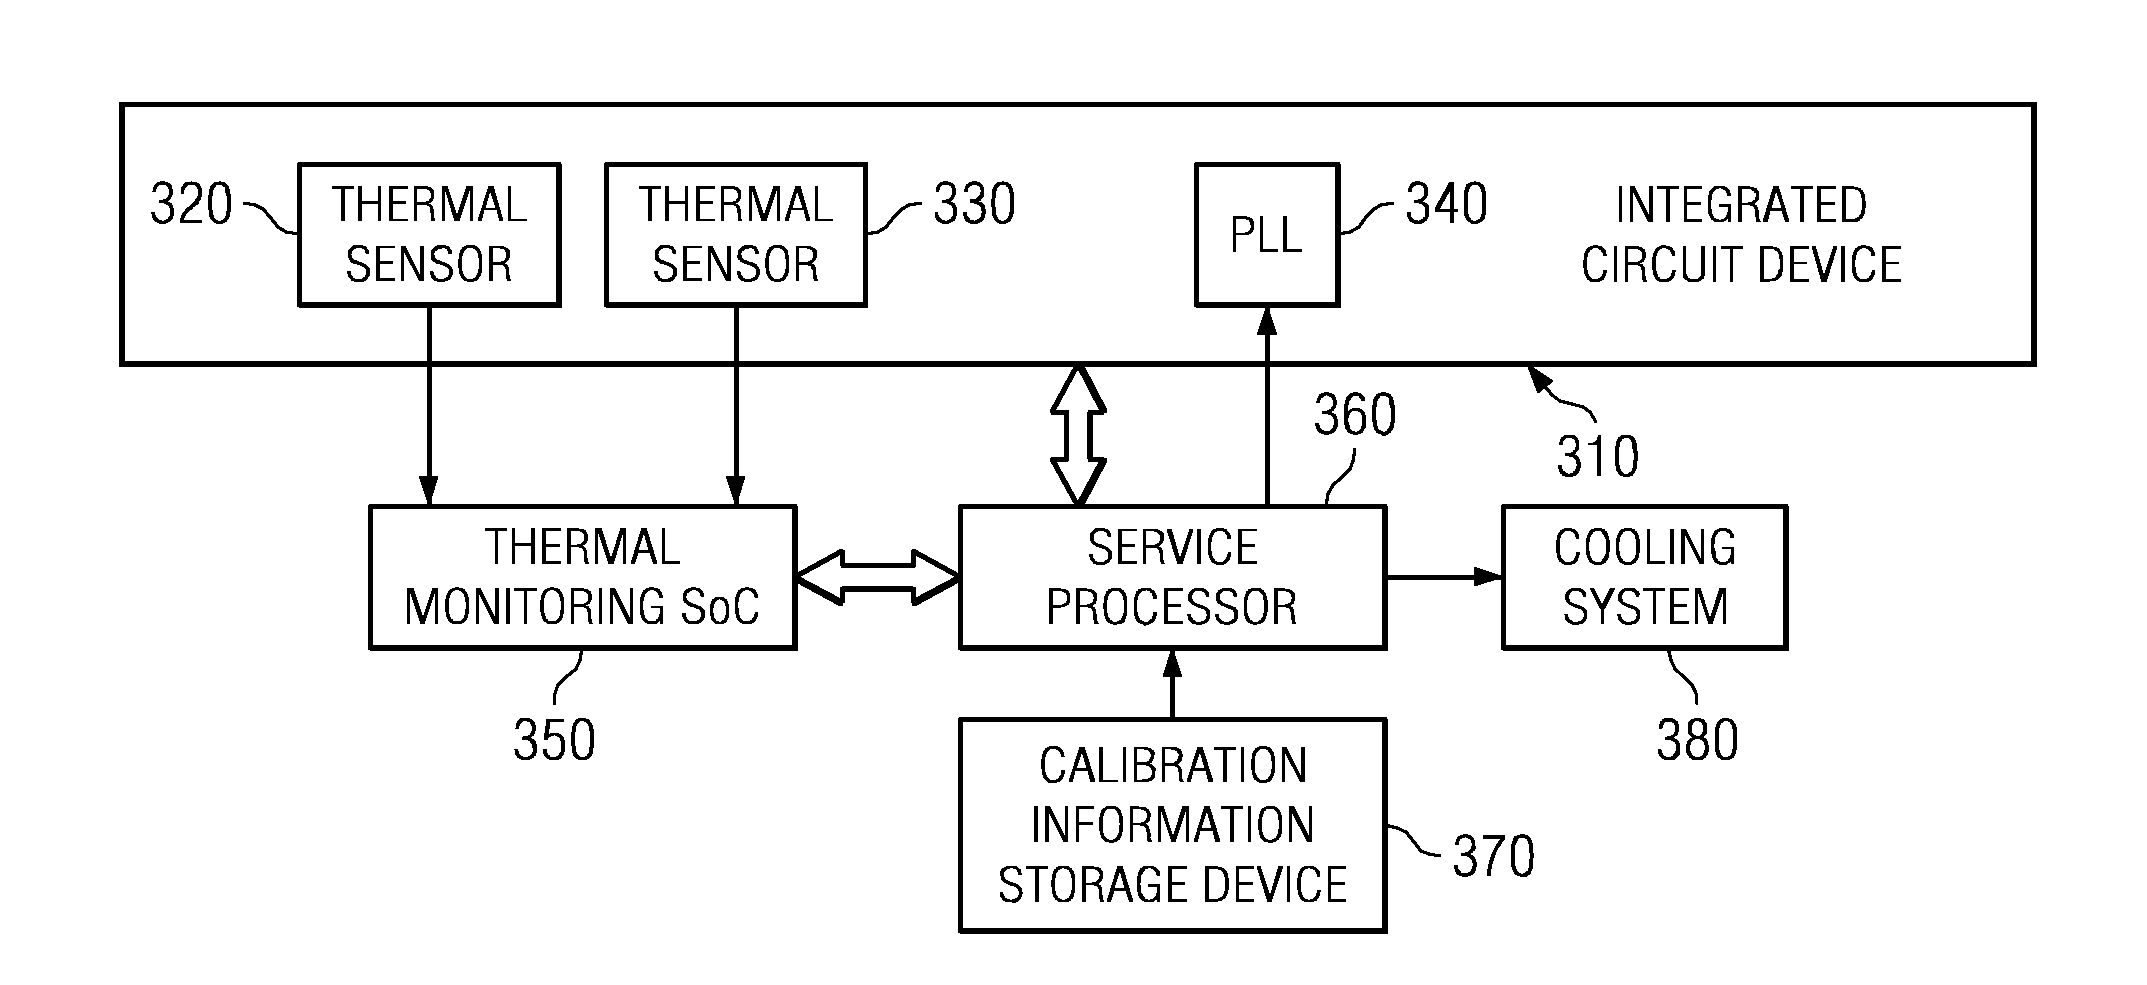 Structure for a Phase Locked Loop with Adjustable Voltage Based on Temperature